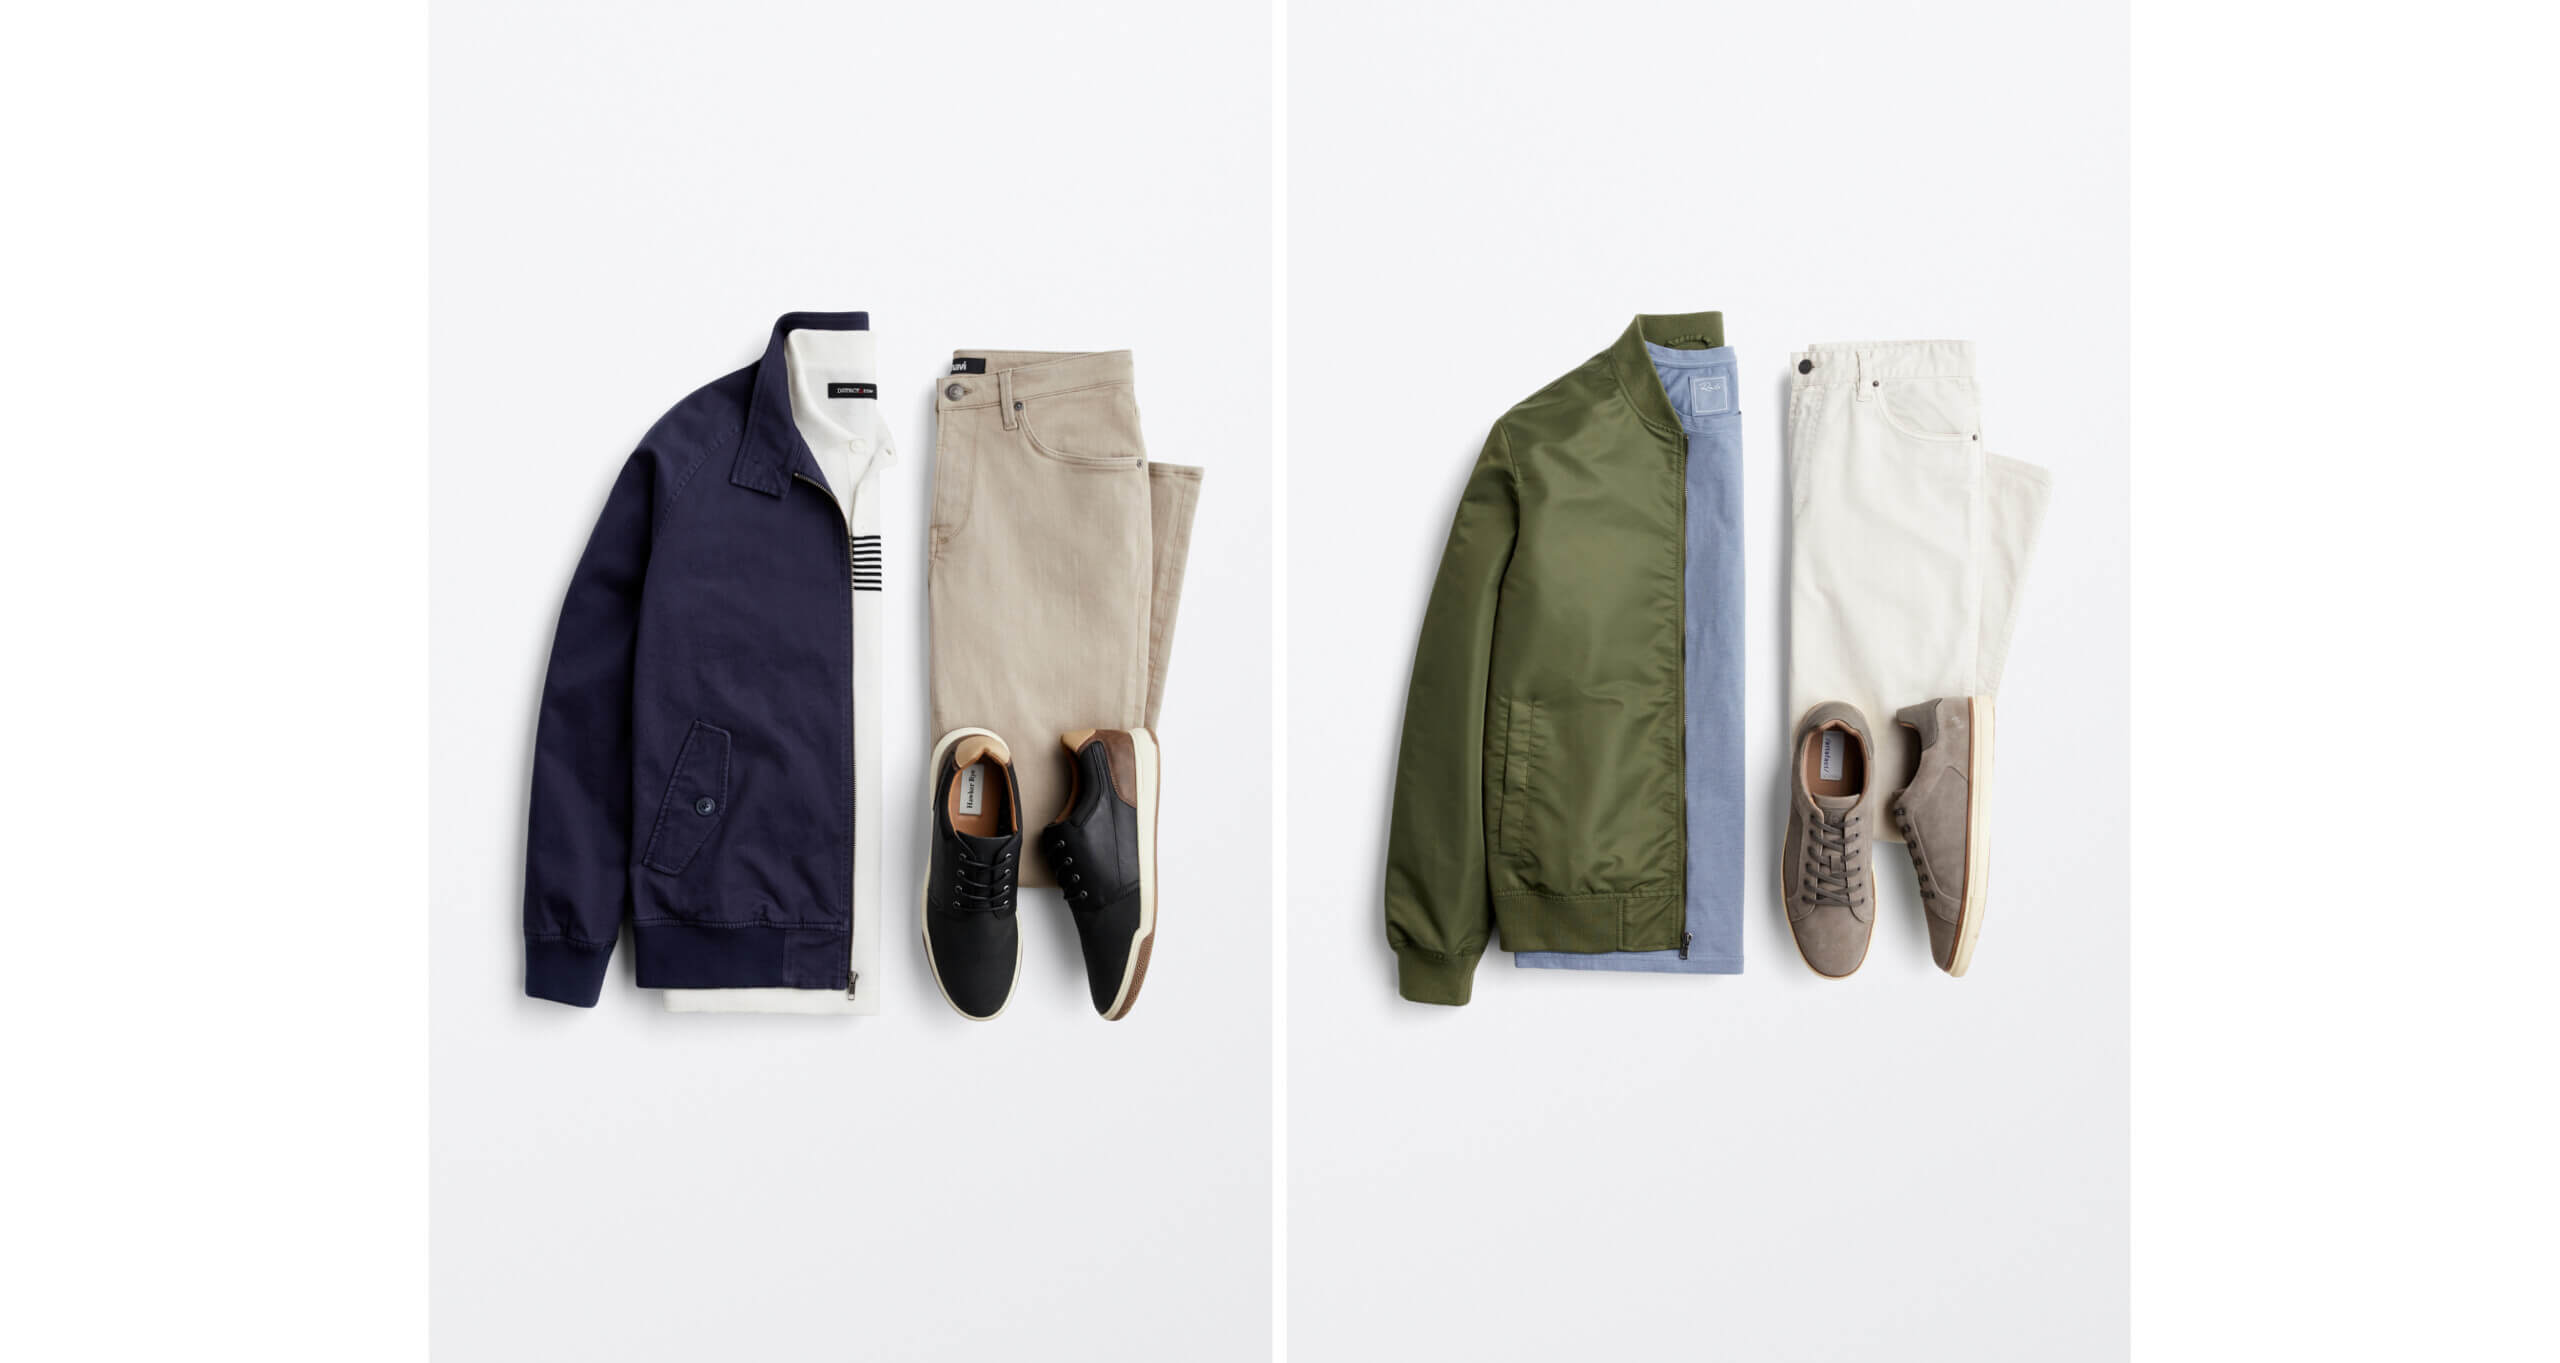  On the left, a flatlay of a navy blue bomber jacket, white polo shirt, khaki pants and black oxford sneakers. On the right, a flatlay of a sage green nylon bomber jacket, blue tee, white slacks, and gray sneakers.